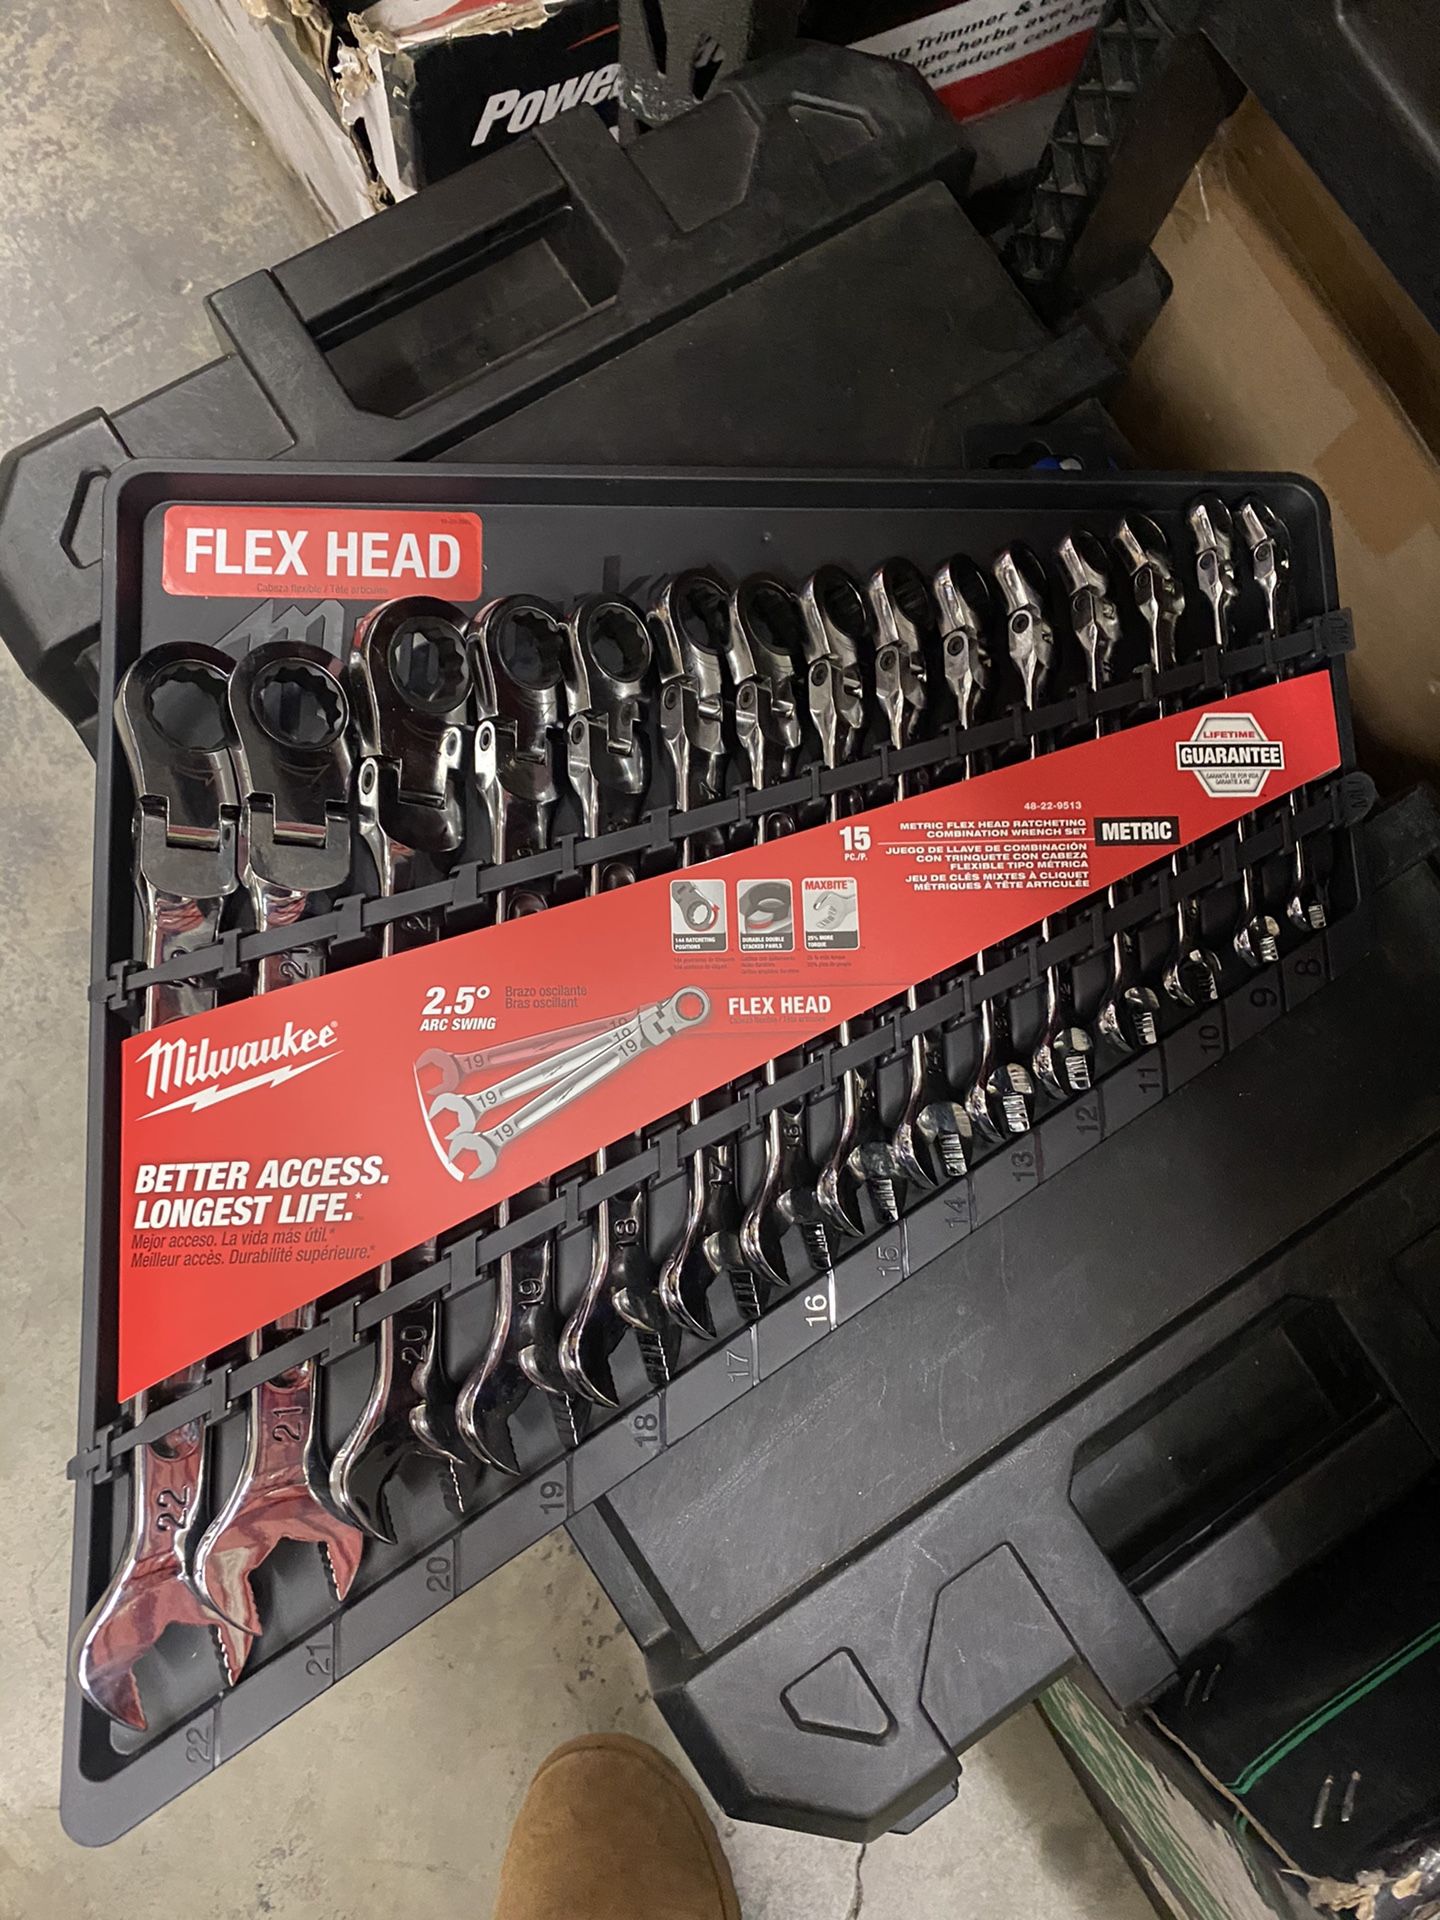 Milwaukee 144-Position Flex-Head Ratcheting Combination Wrench Set Metric 15-Piece) for Sale in Hesperia, CA OfferUp